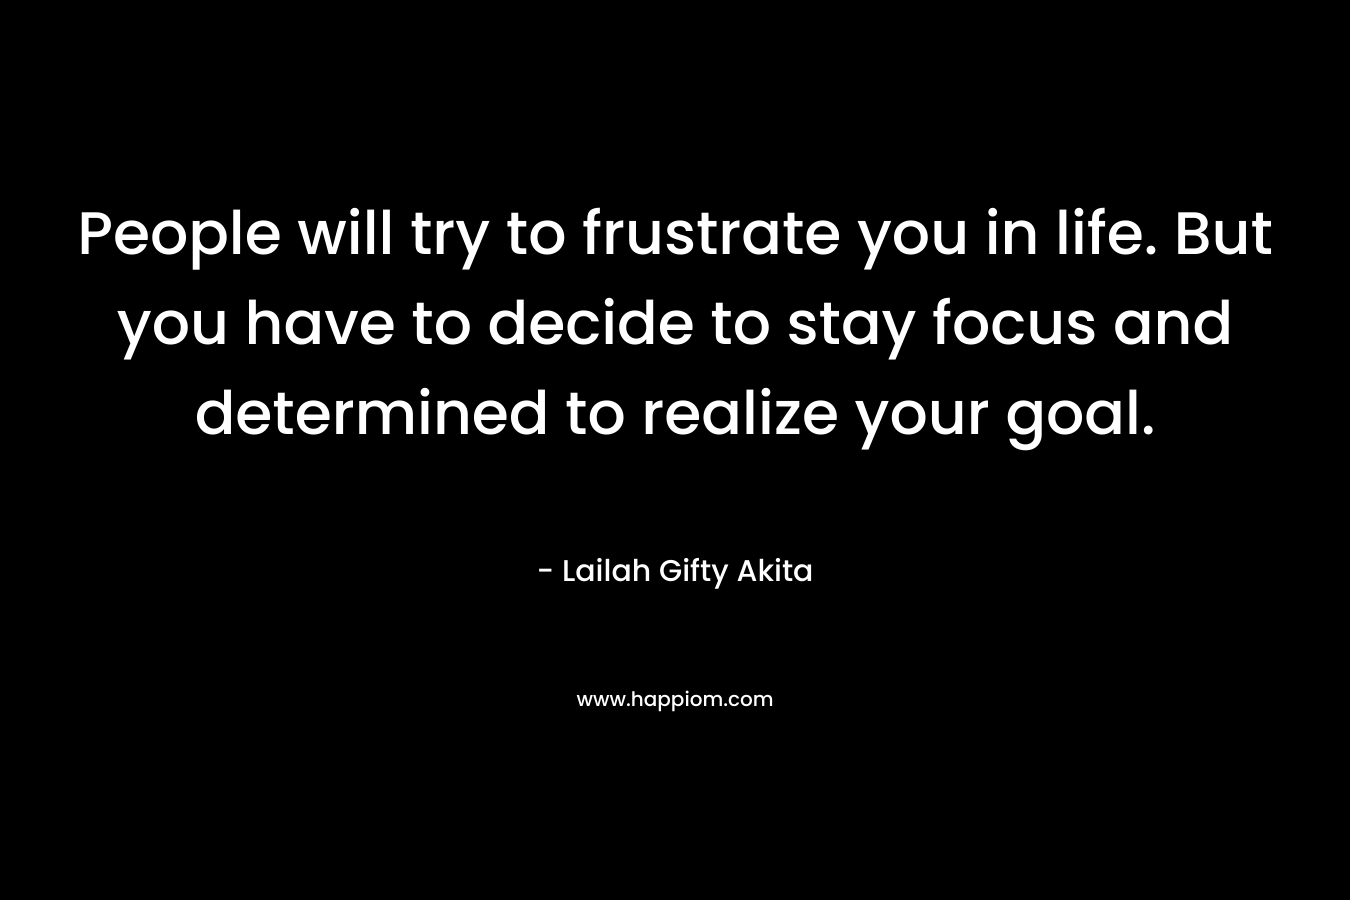 People will try to frustrate you in life. But you have to decide to stay focus and determined to realize your goal.